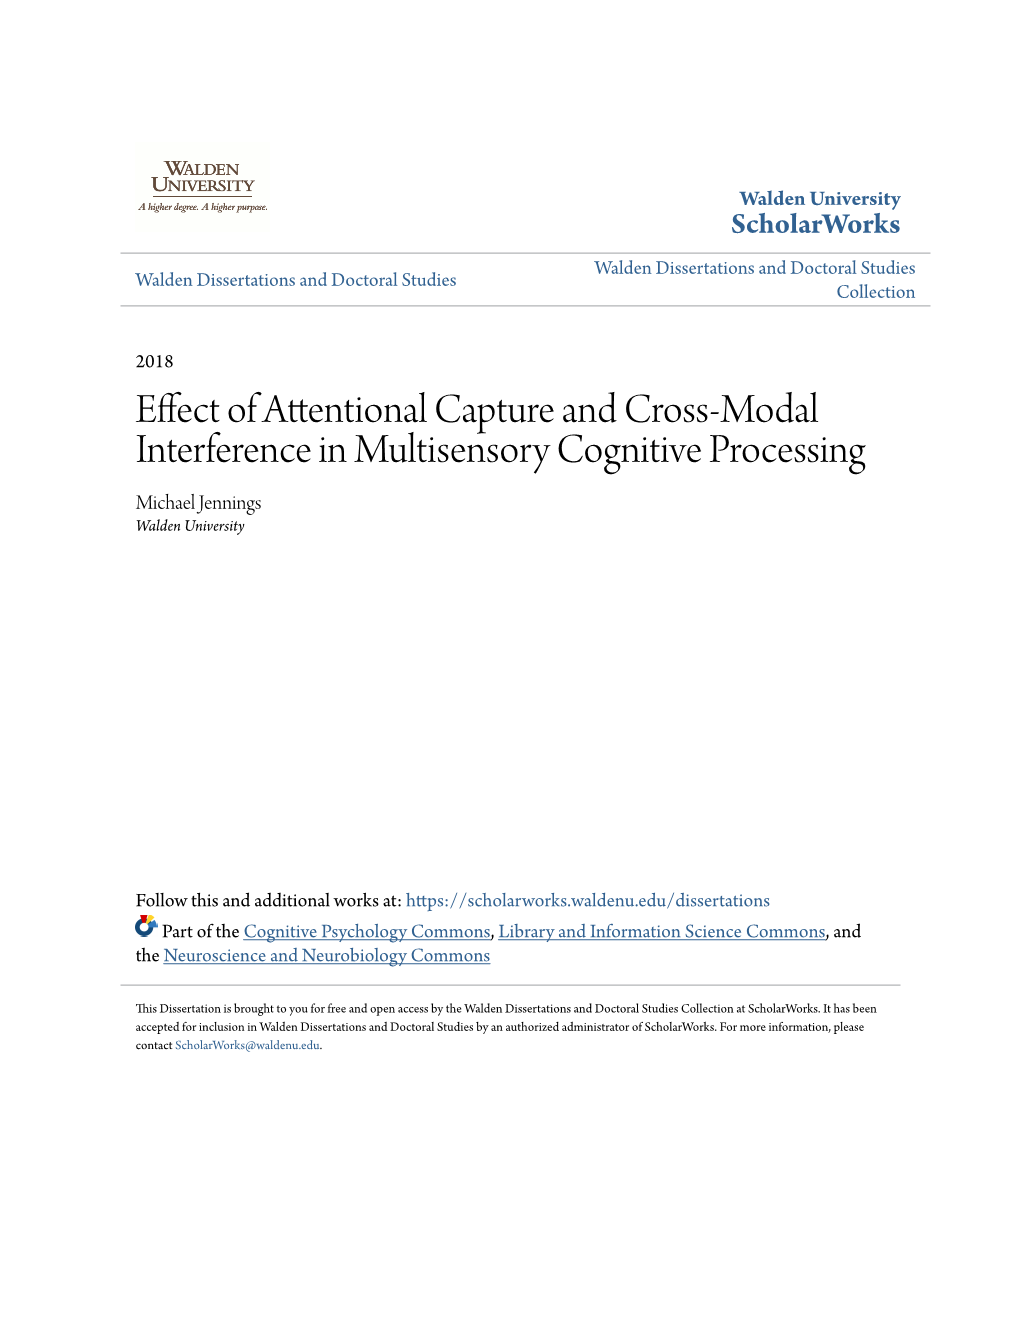 Effect of Attentional Capture and Cross-Modal Interference in Multisensory Cognitive Processing Michael Jennings Walden University